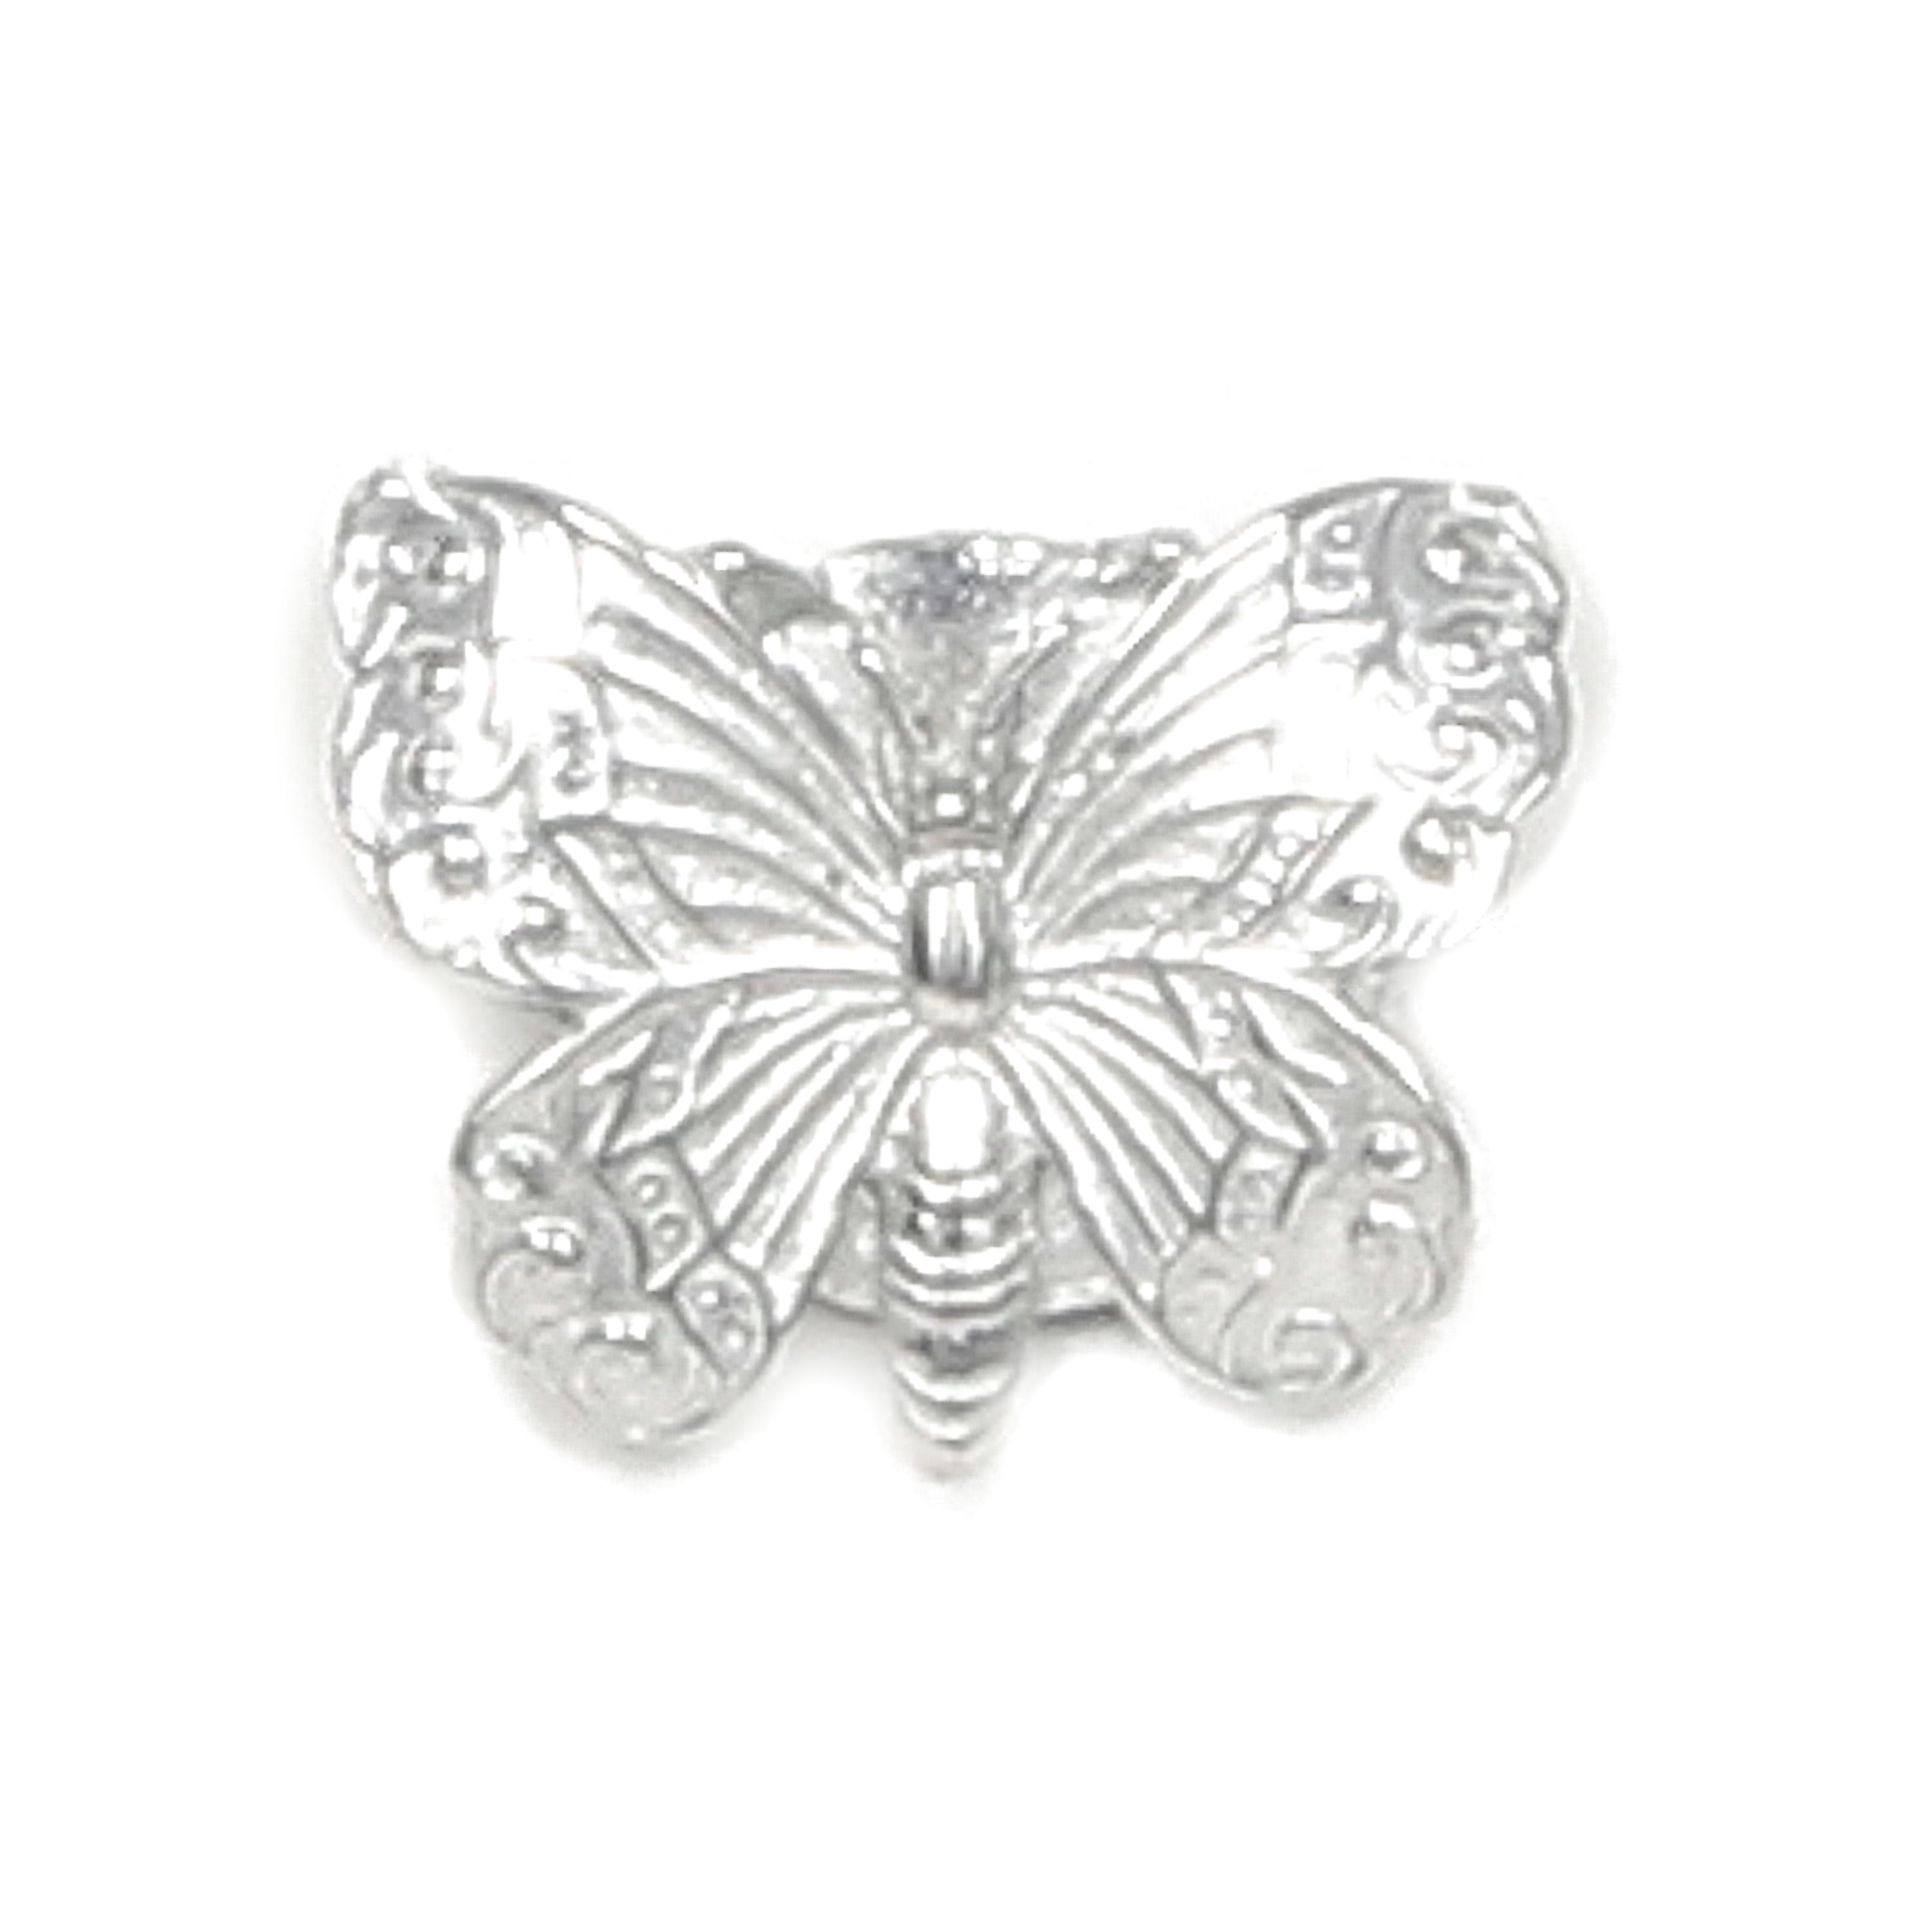 Pewter Butterfly Butterfly Design Pewter Pin with Magnetic Back-Made in USA. Gift packaged by Lucina K